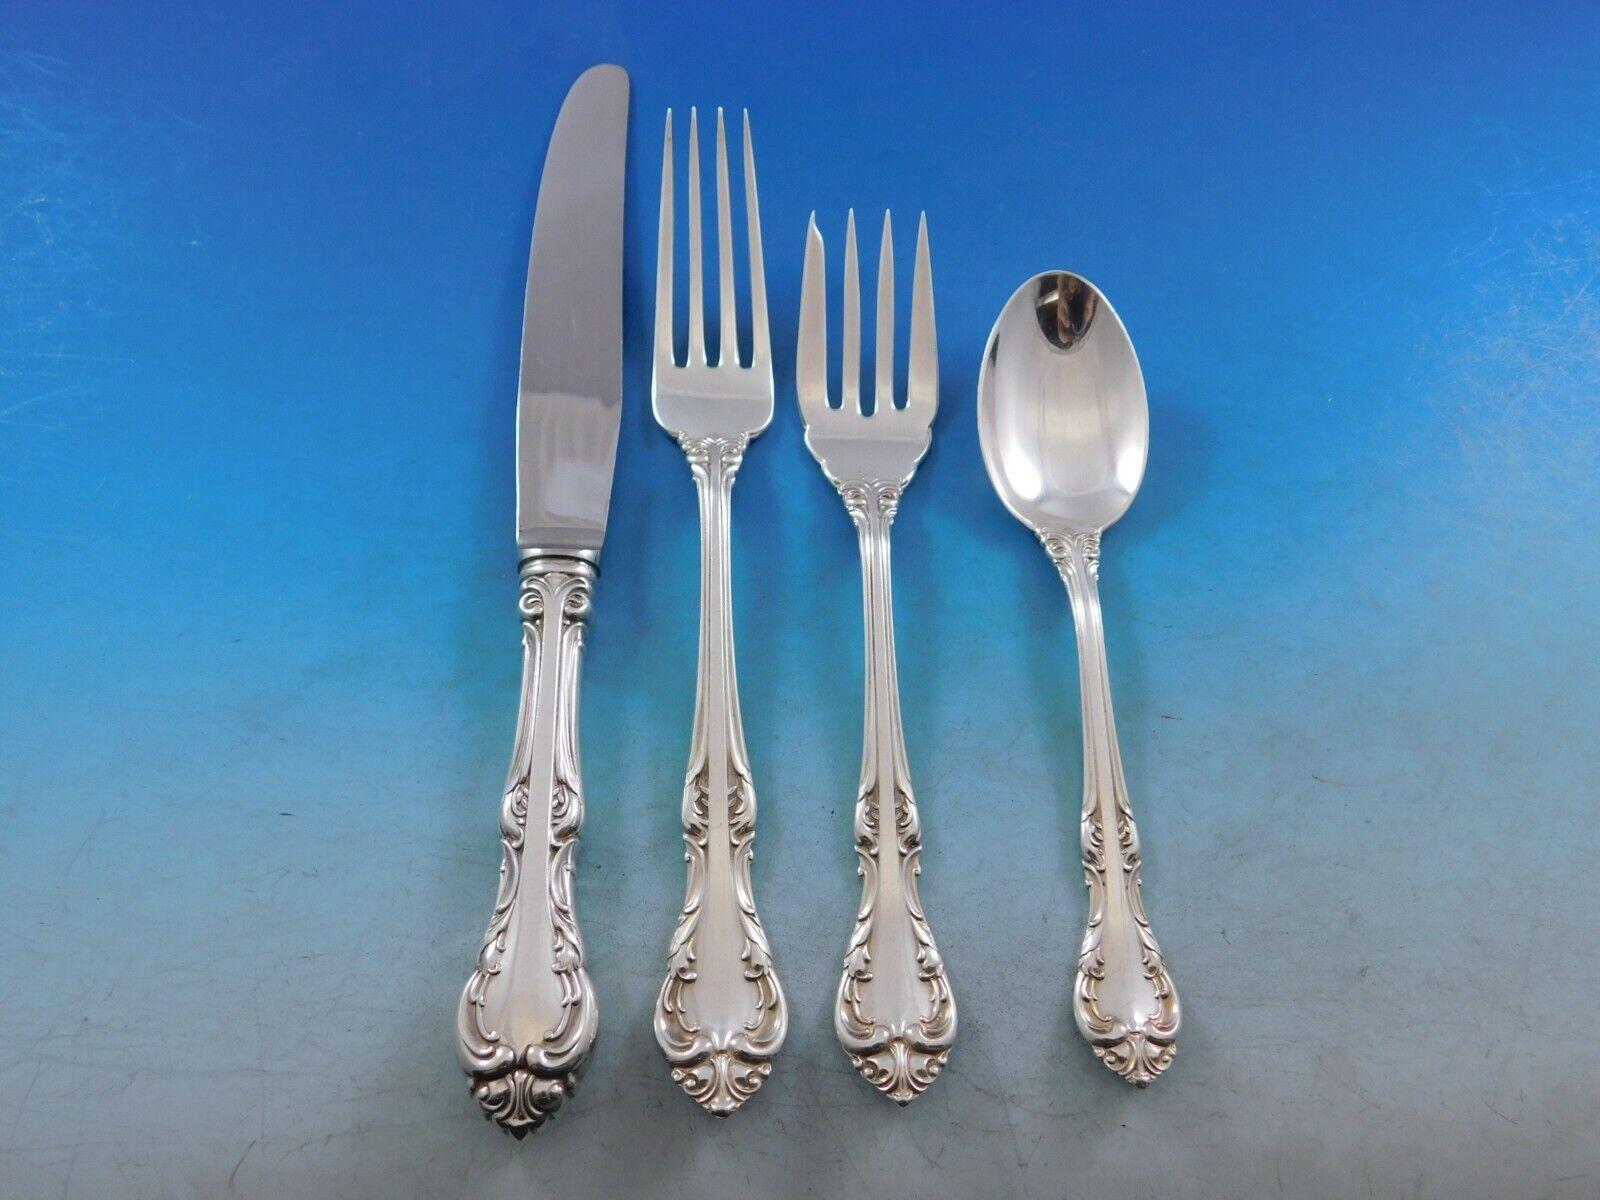 Gorgeous Laurentian by Birks (Canada) sterling silver Flatware set, 49 pieces. This set includes:

8 Knives, 8 5/8